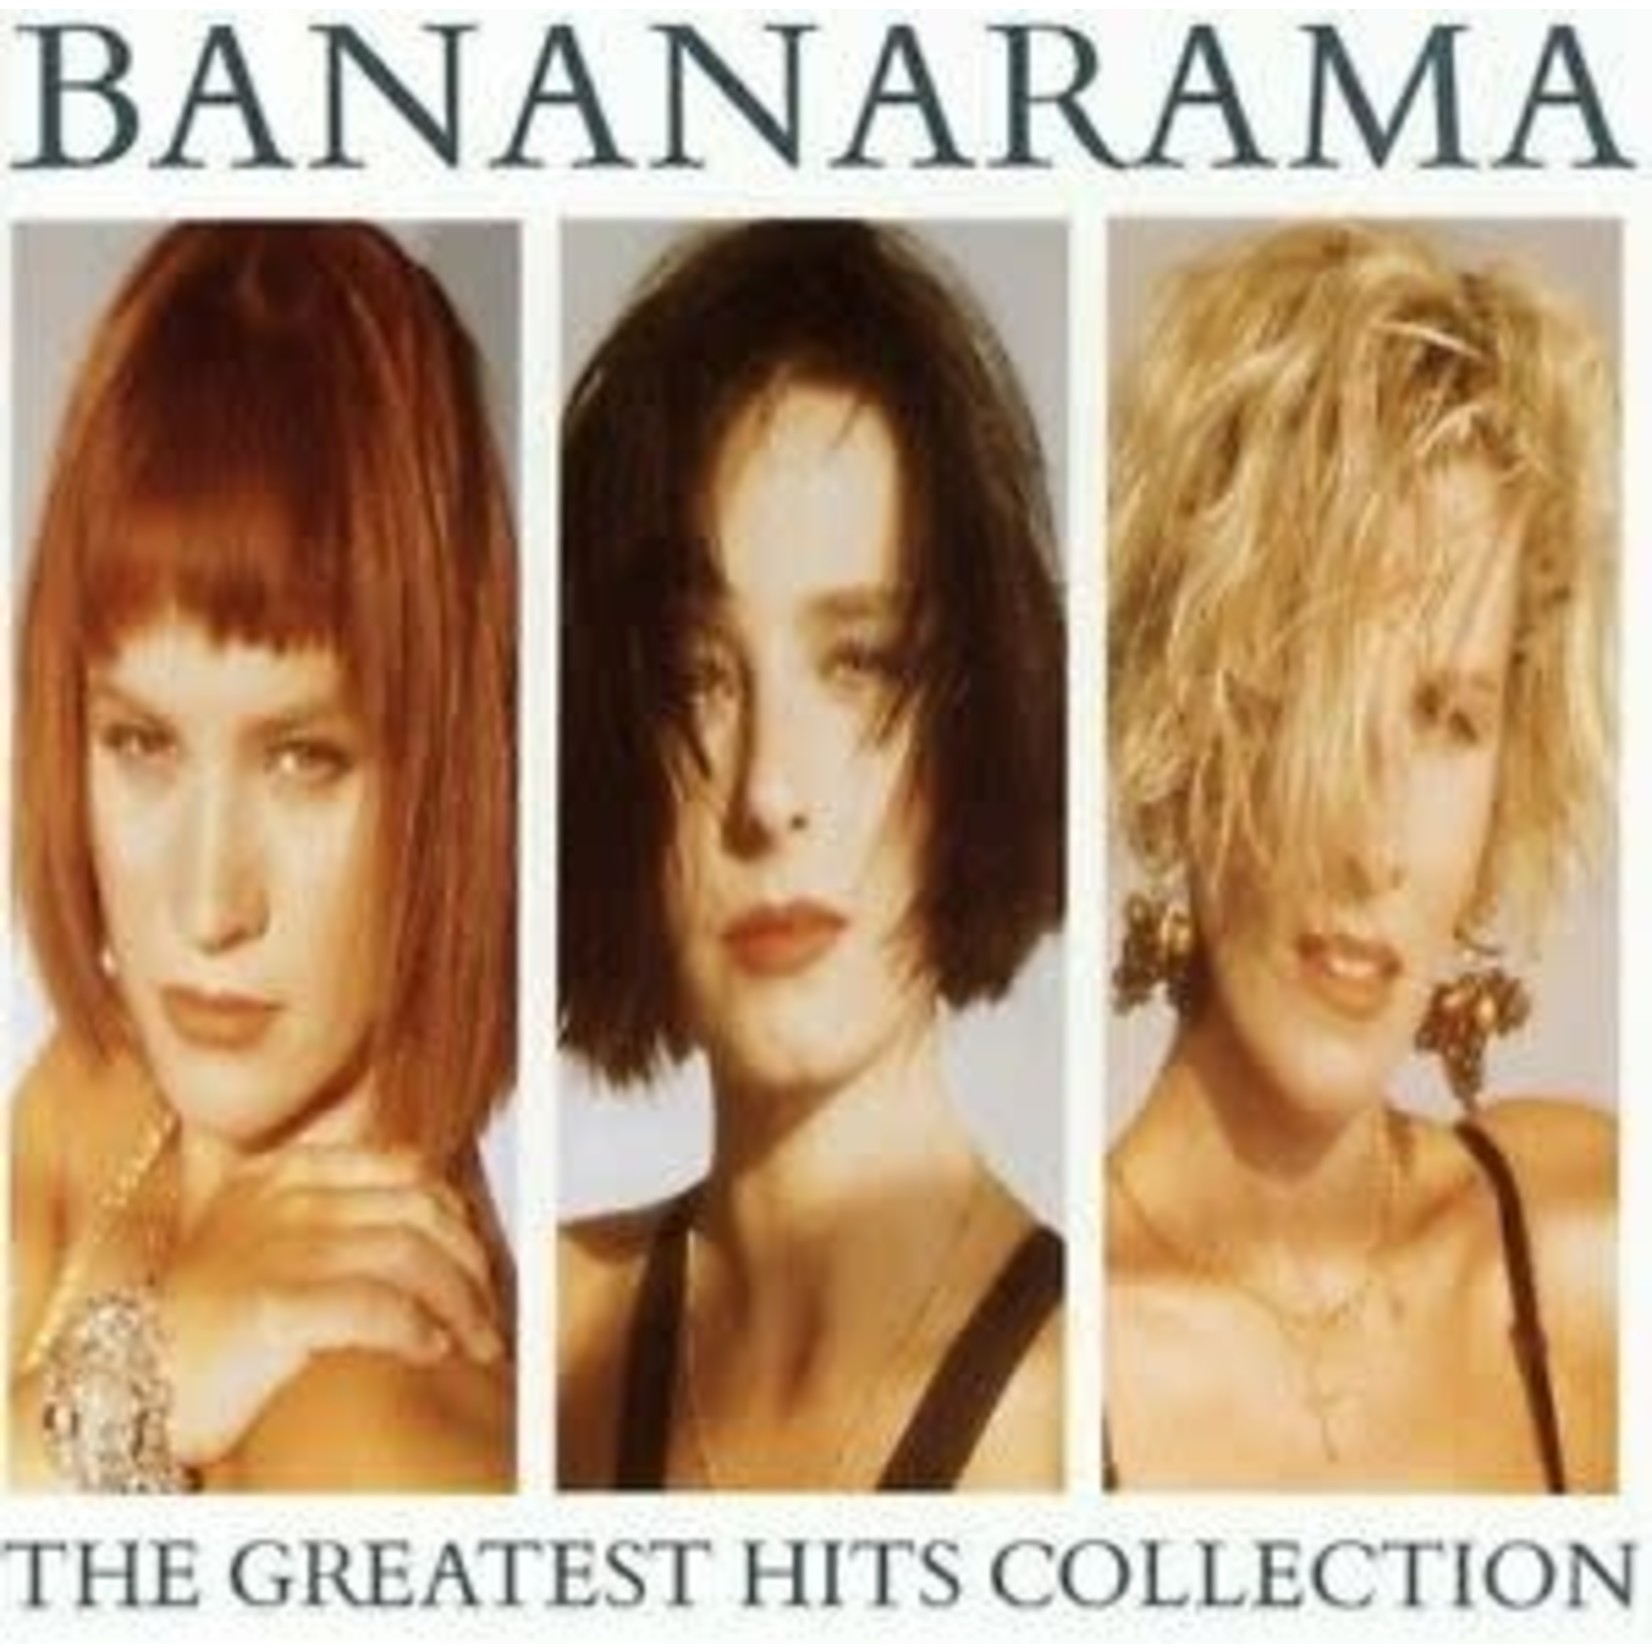 Bananarama - The Greatest Hits Collection [USED CD]